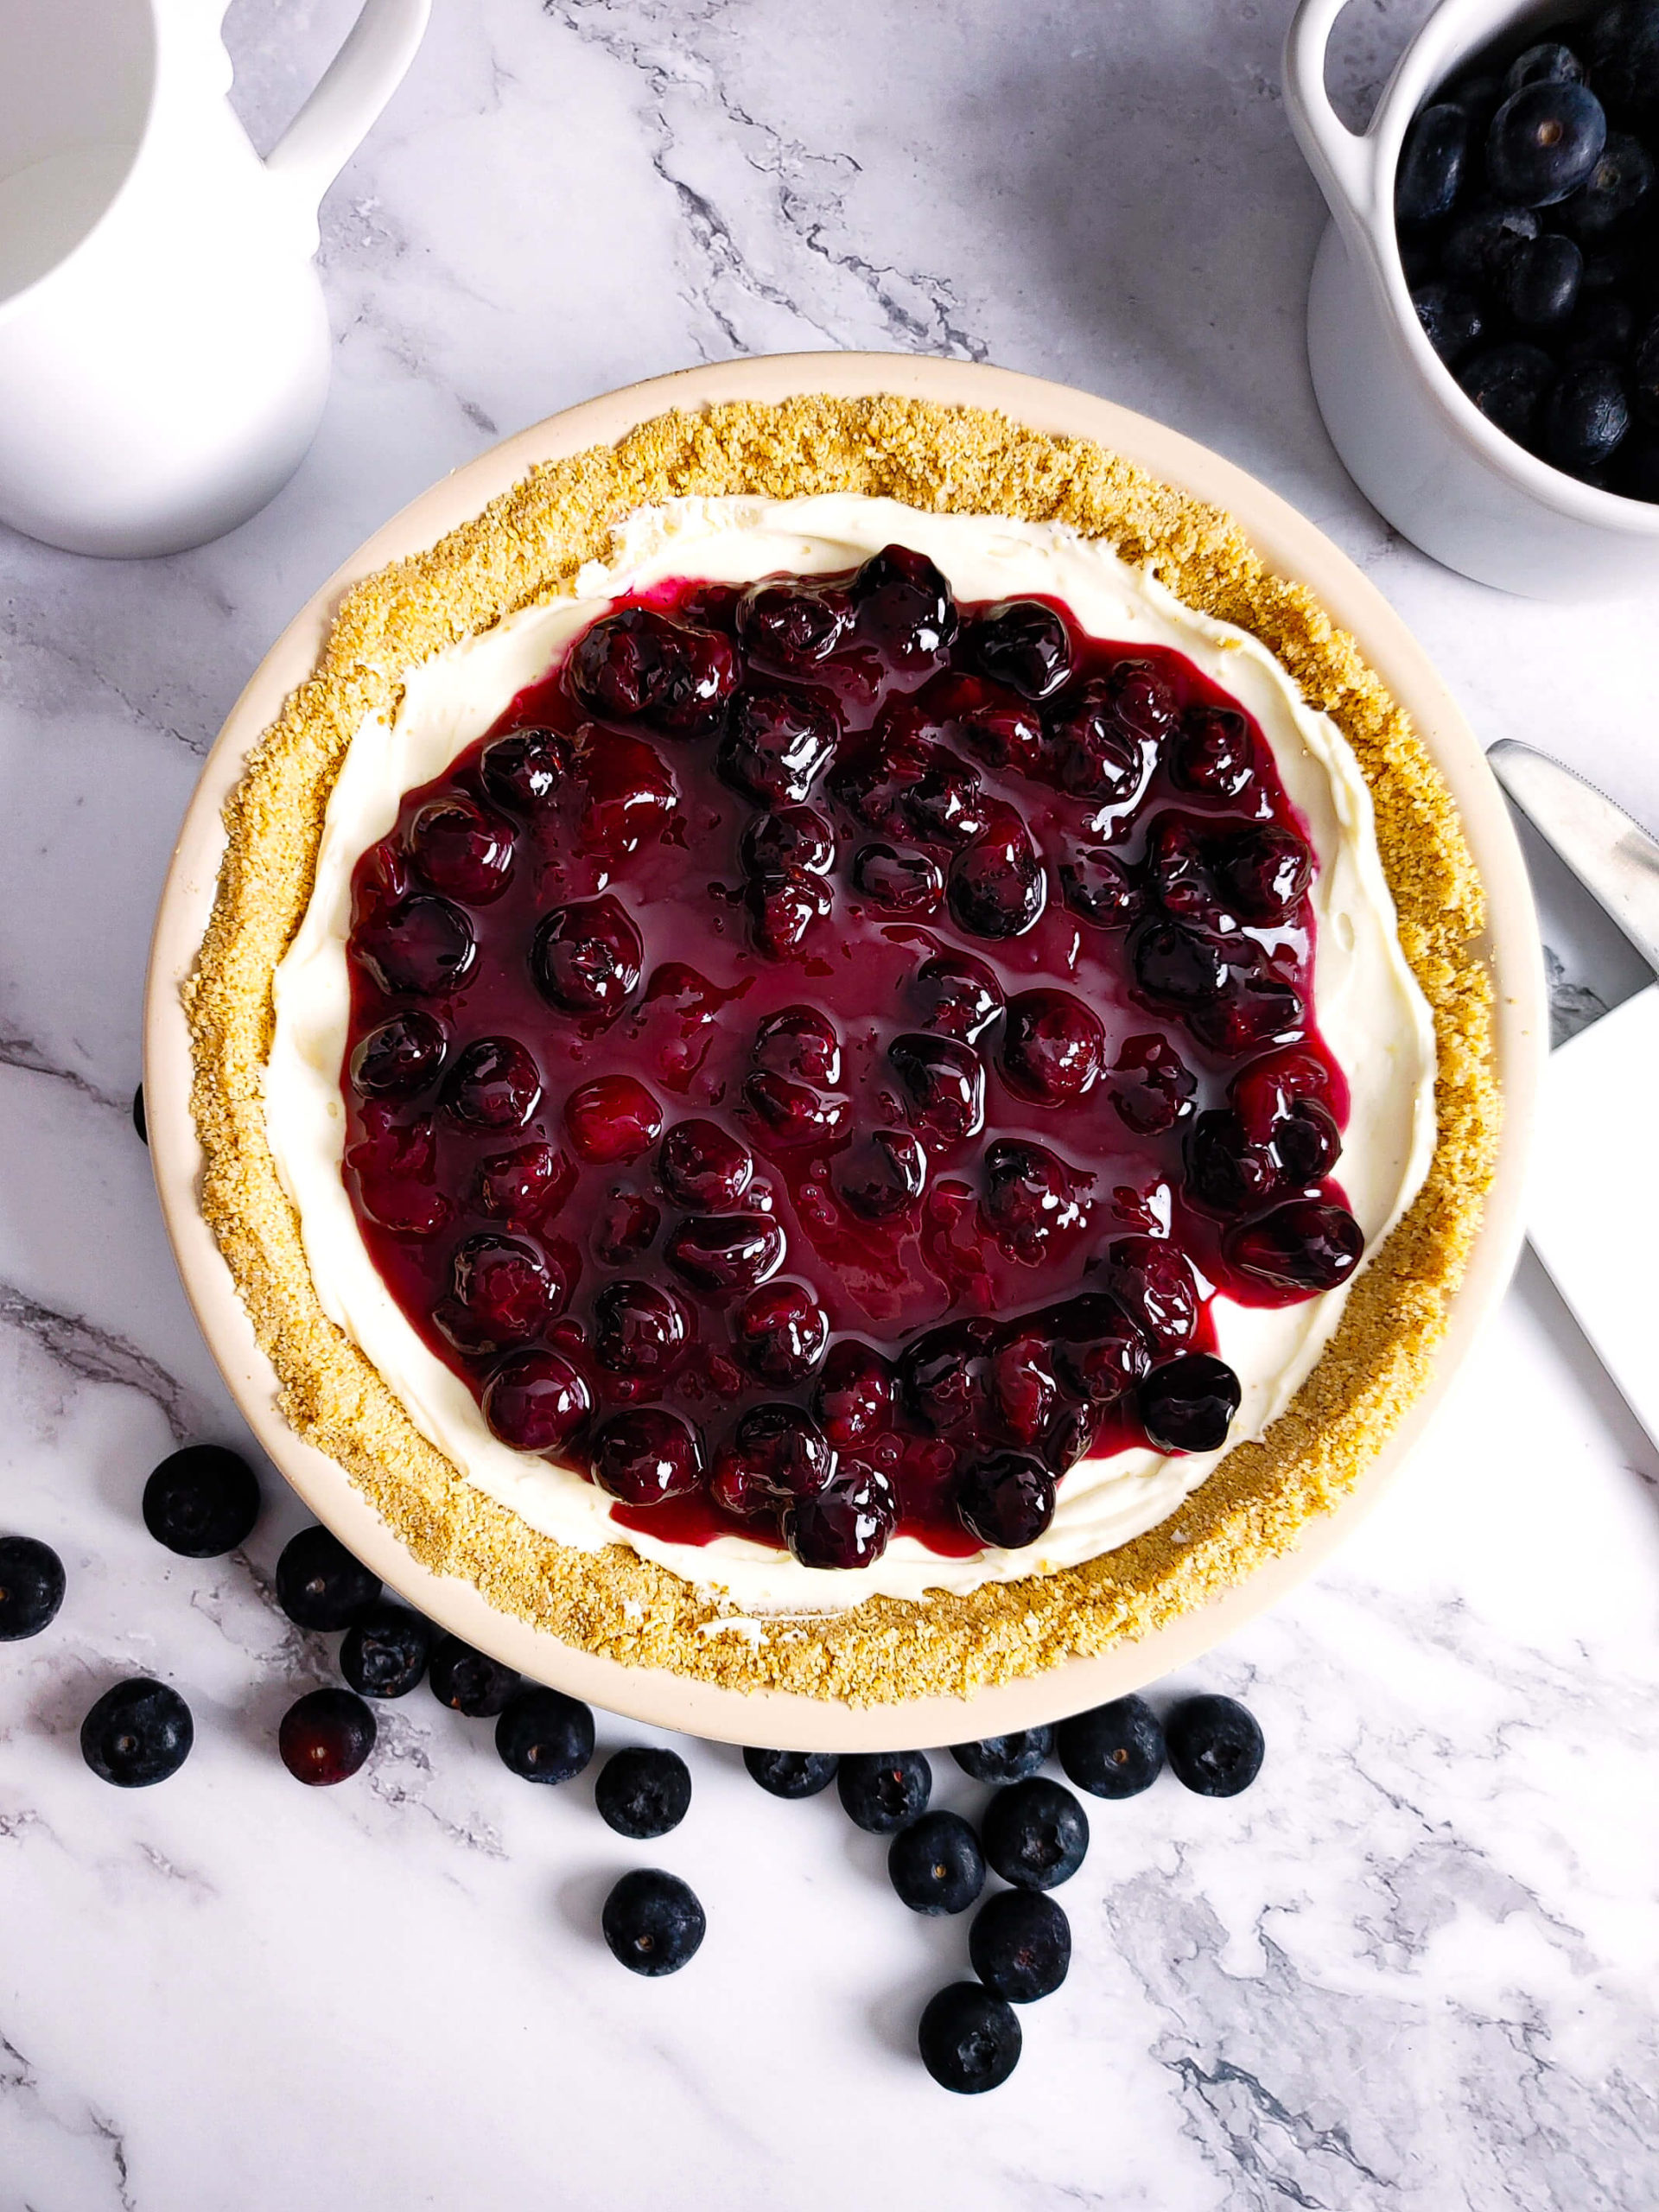 TOP THE CHEESECAKE WITH THE BLUEBERRY TOPPING